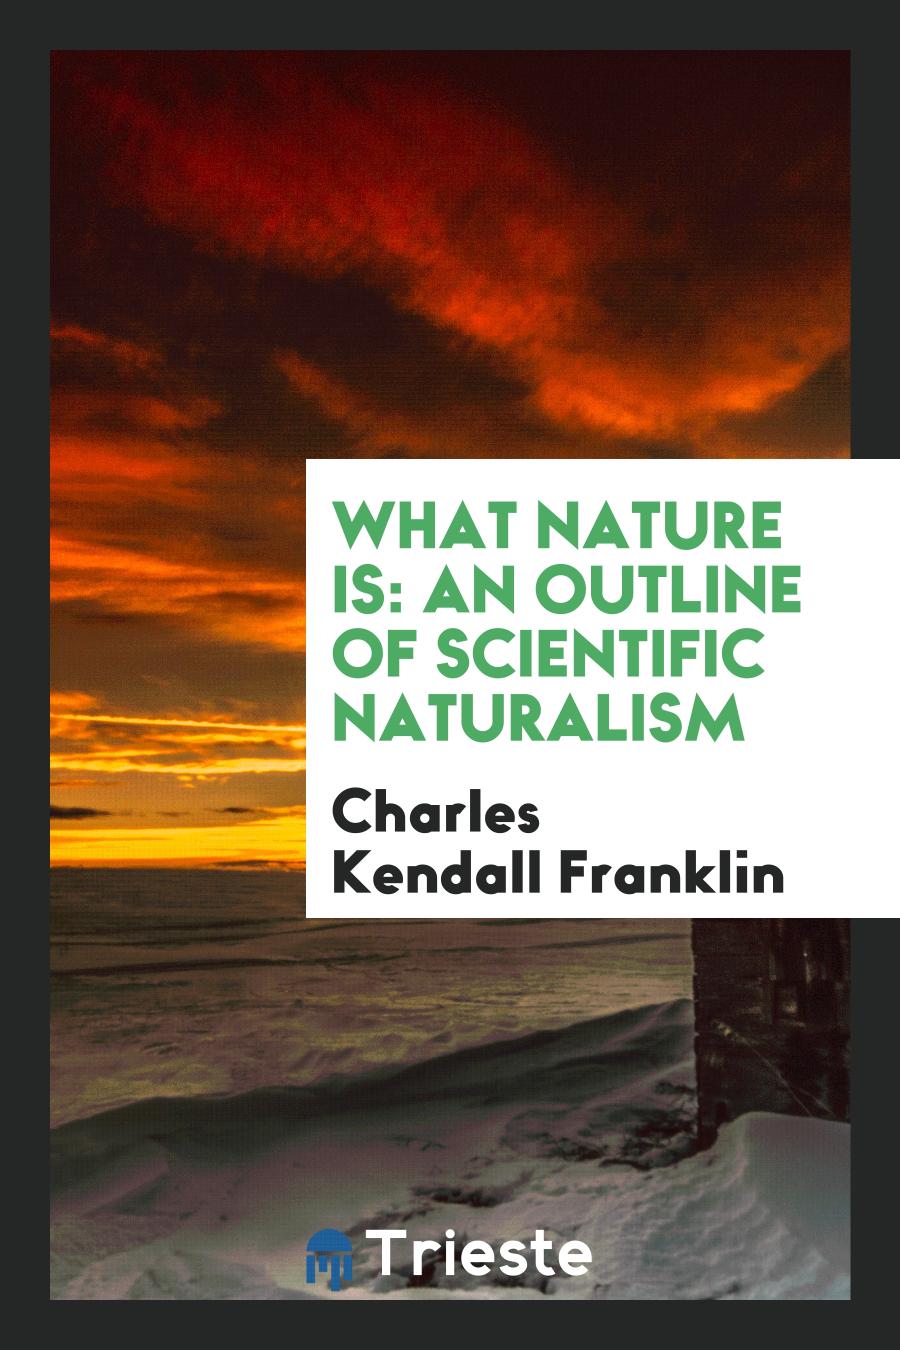 What Nature Is: An Outline of Scientific Naturalism